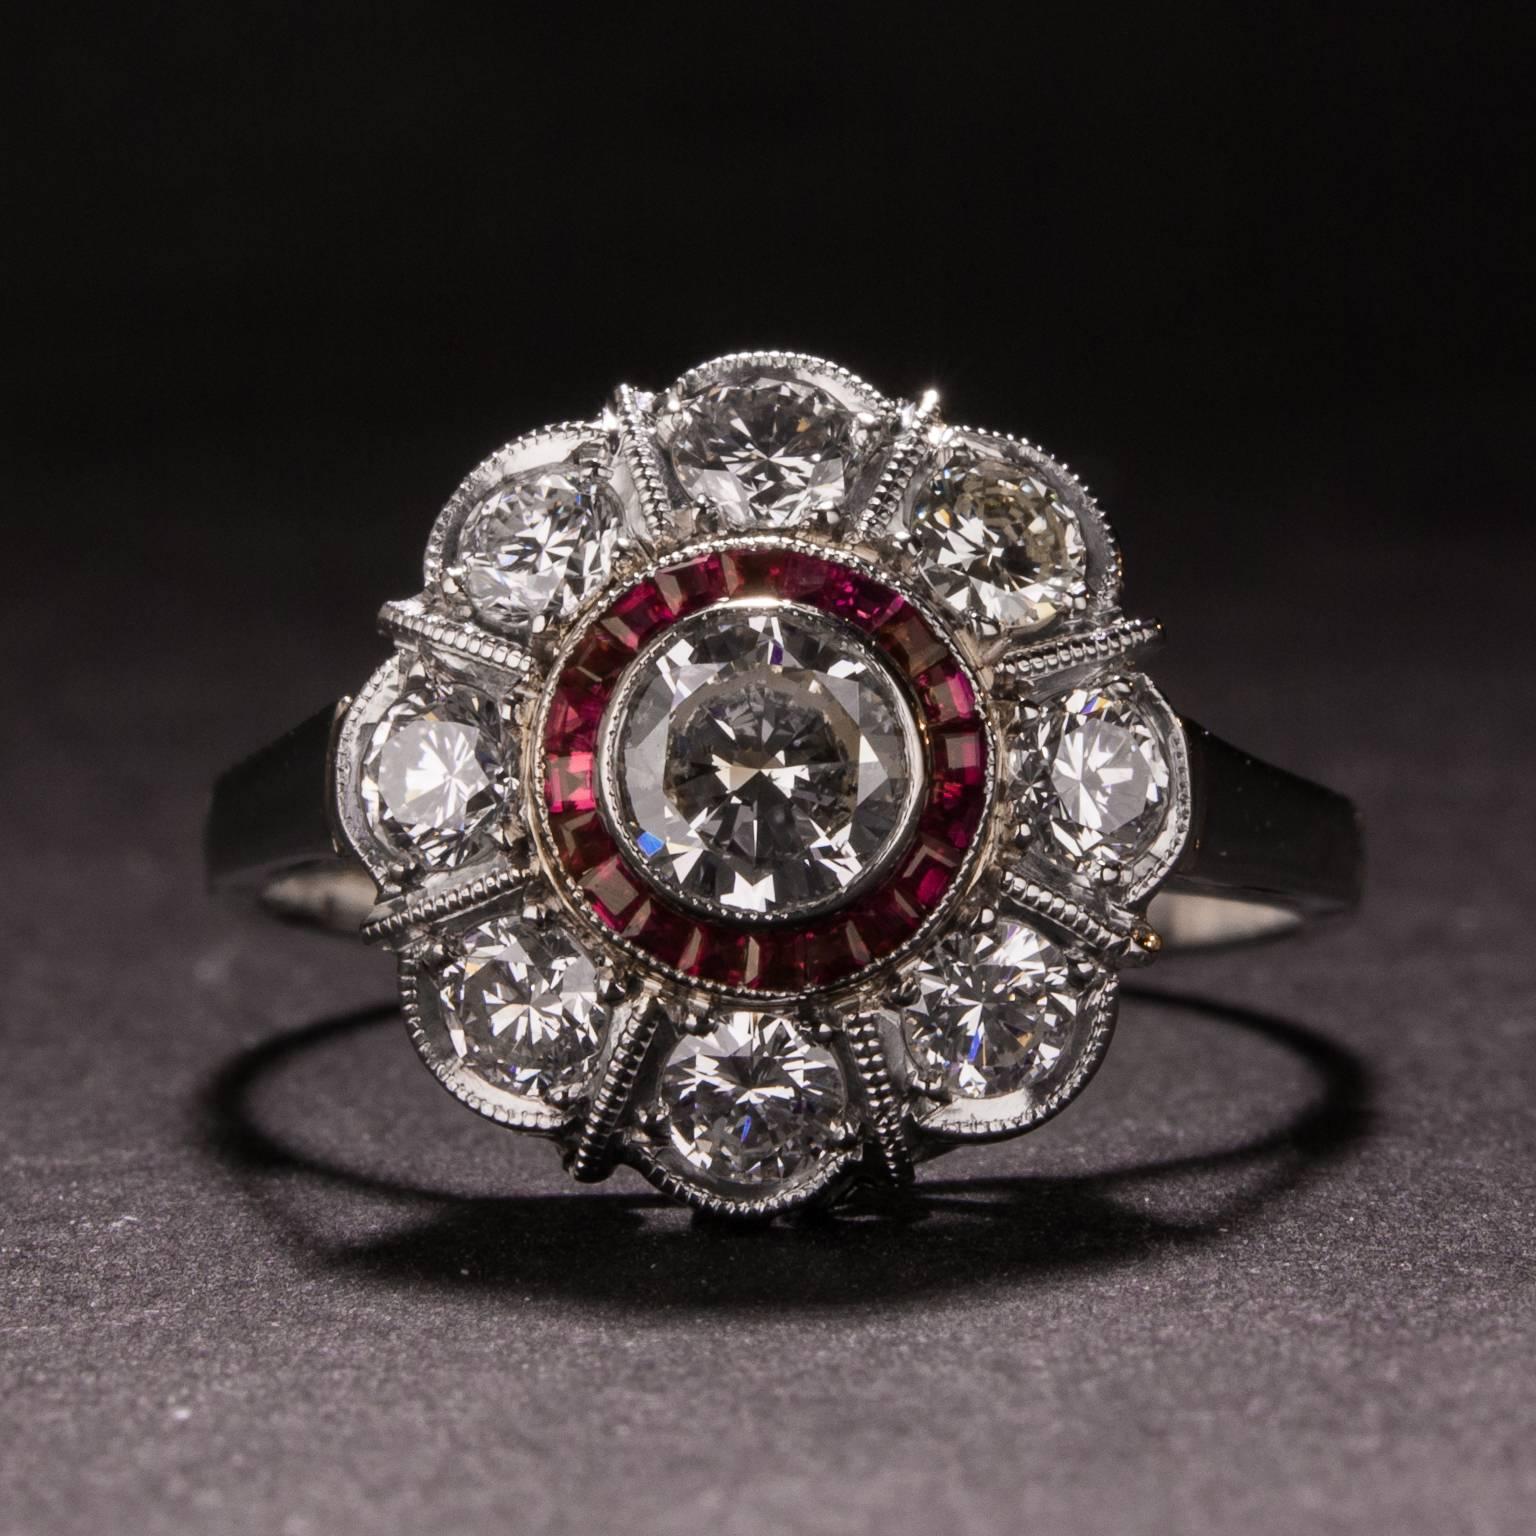 A beautiful diamond and ruby ring set in an elegant platinum mounting. The center diamond weighs .42 carats and it is surrounded by 8 accent diamonds for an approximate combined weigh of 1.00 carat. The center diamond is also surrounded by a halo of